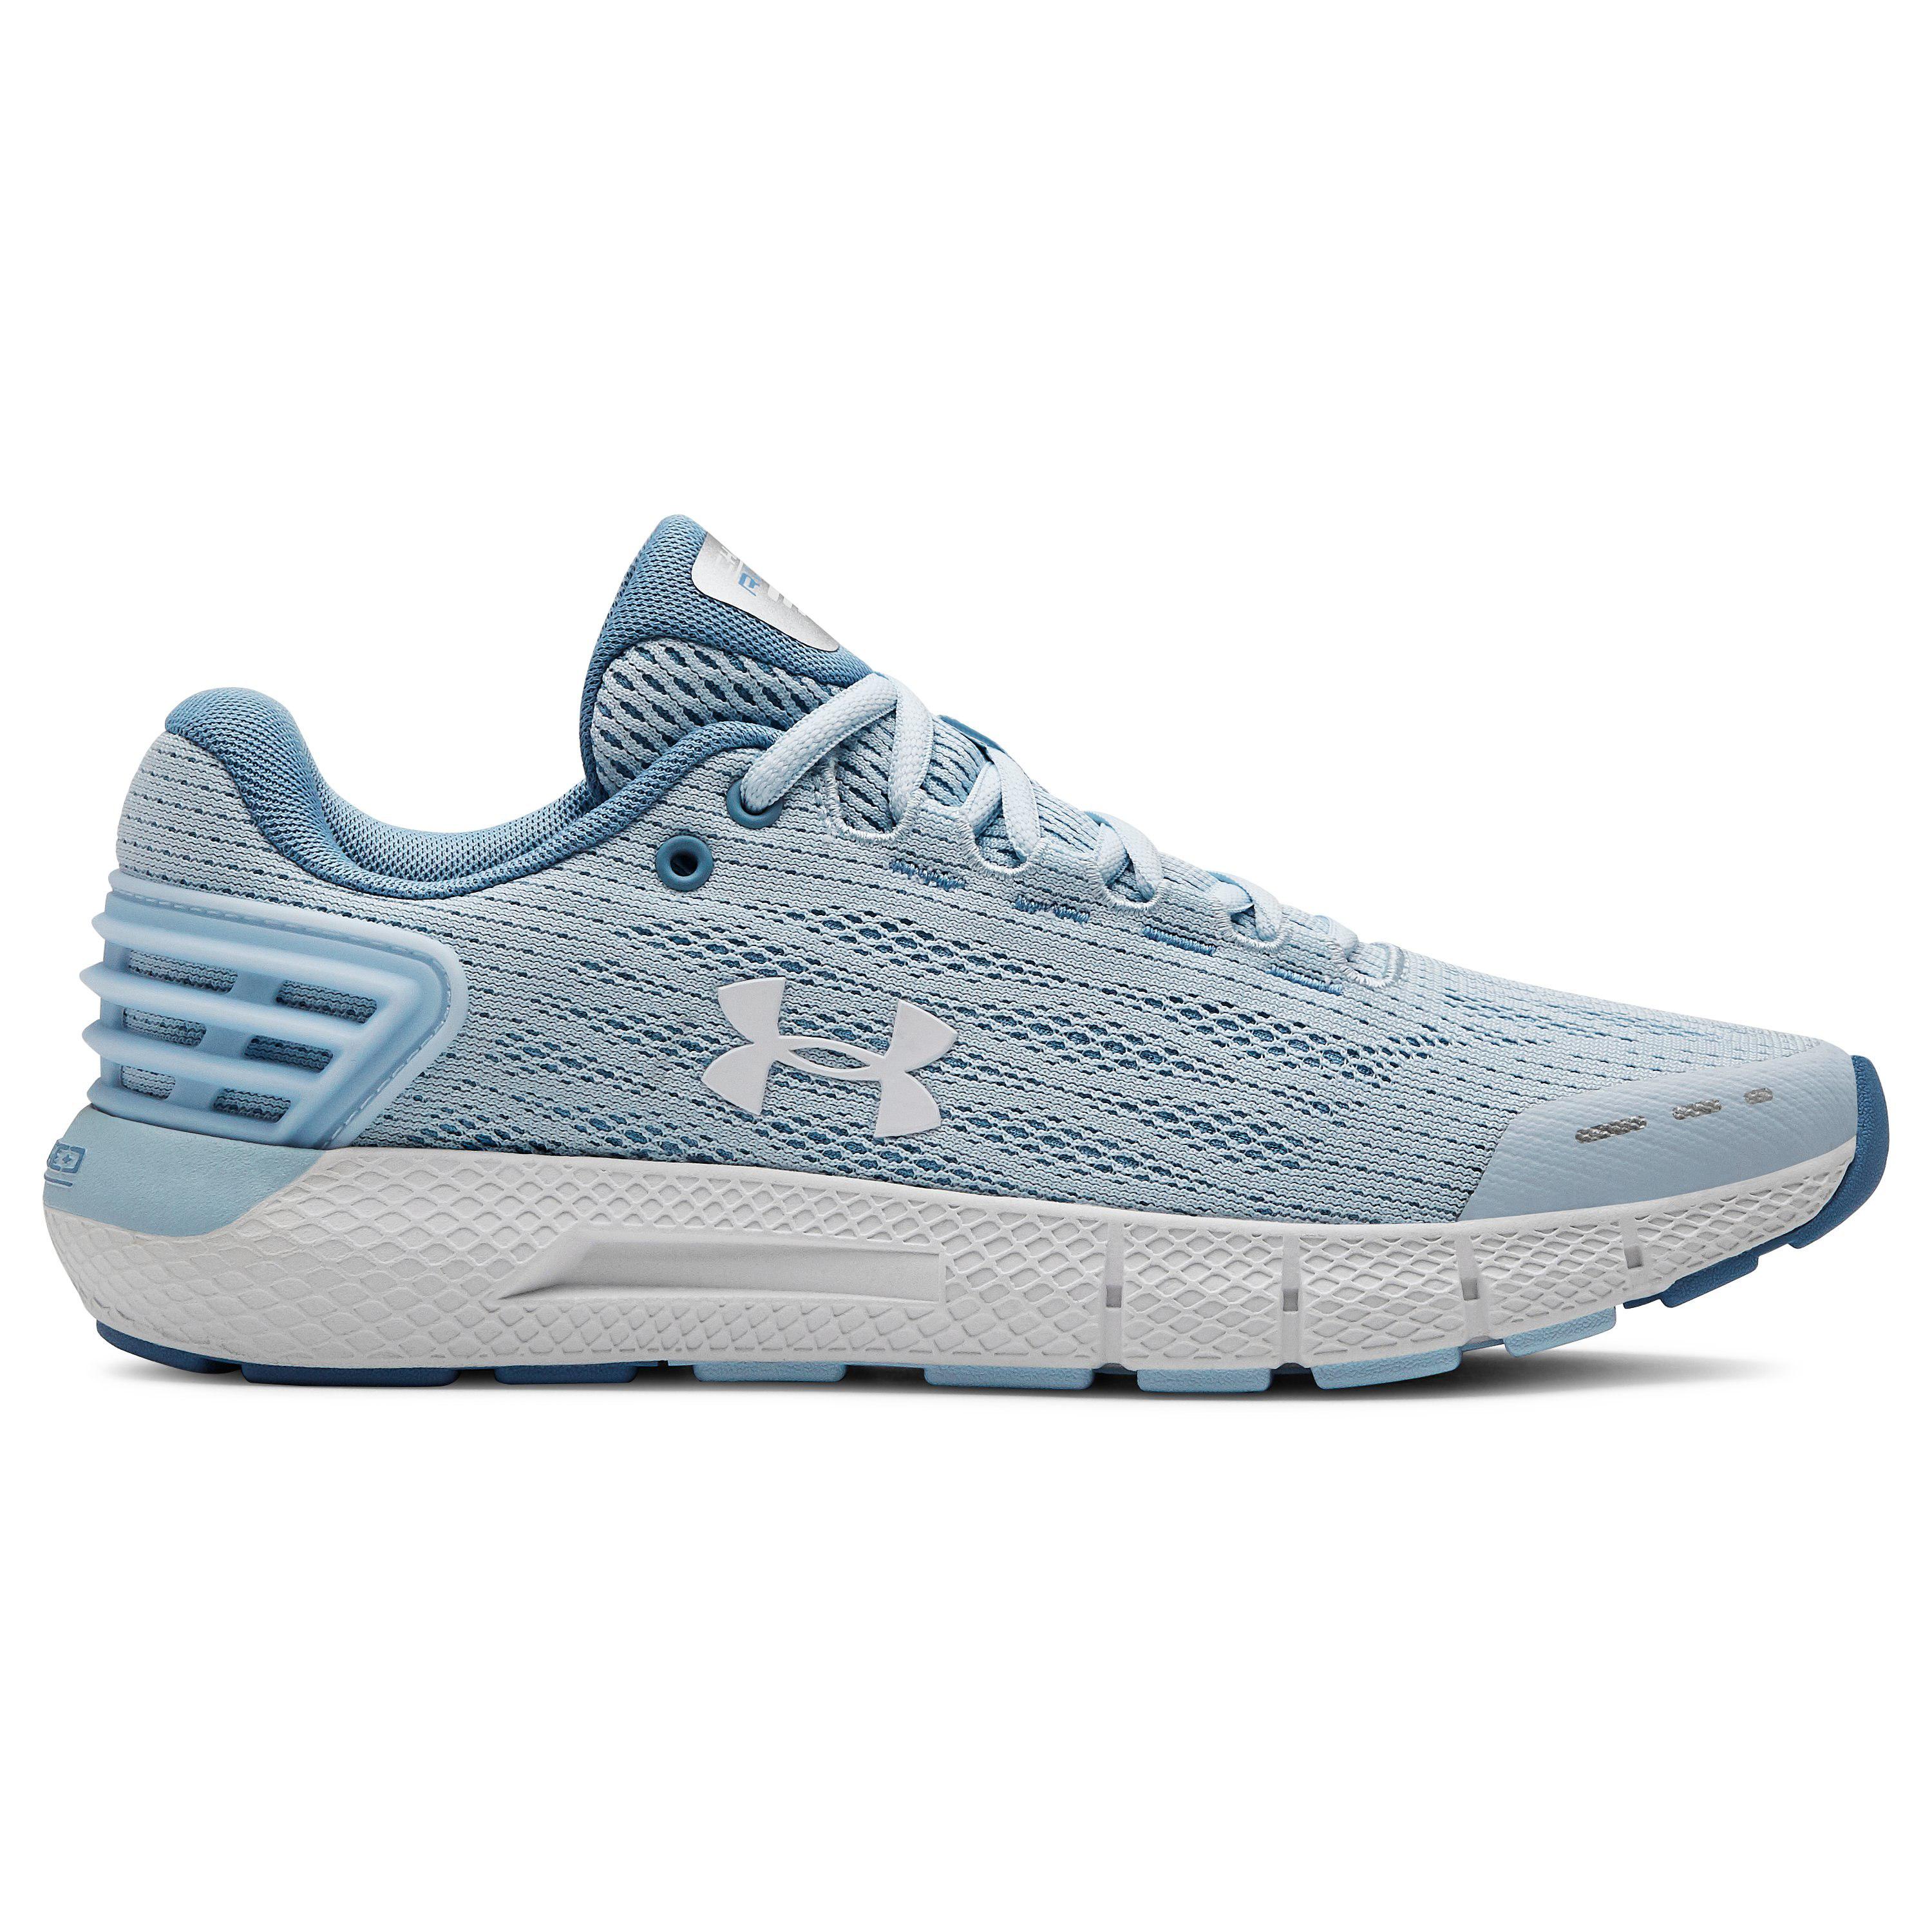 Under Armour Rubber Charged Rogue Women's Running Shoes in Blue - Lyst